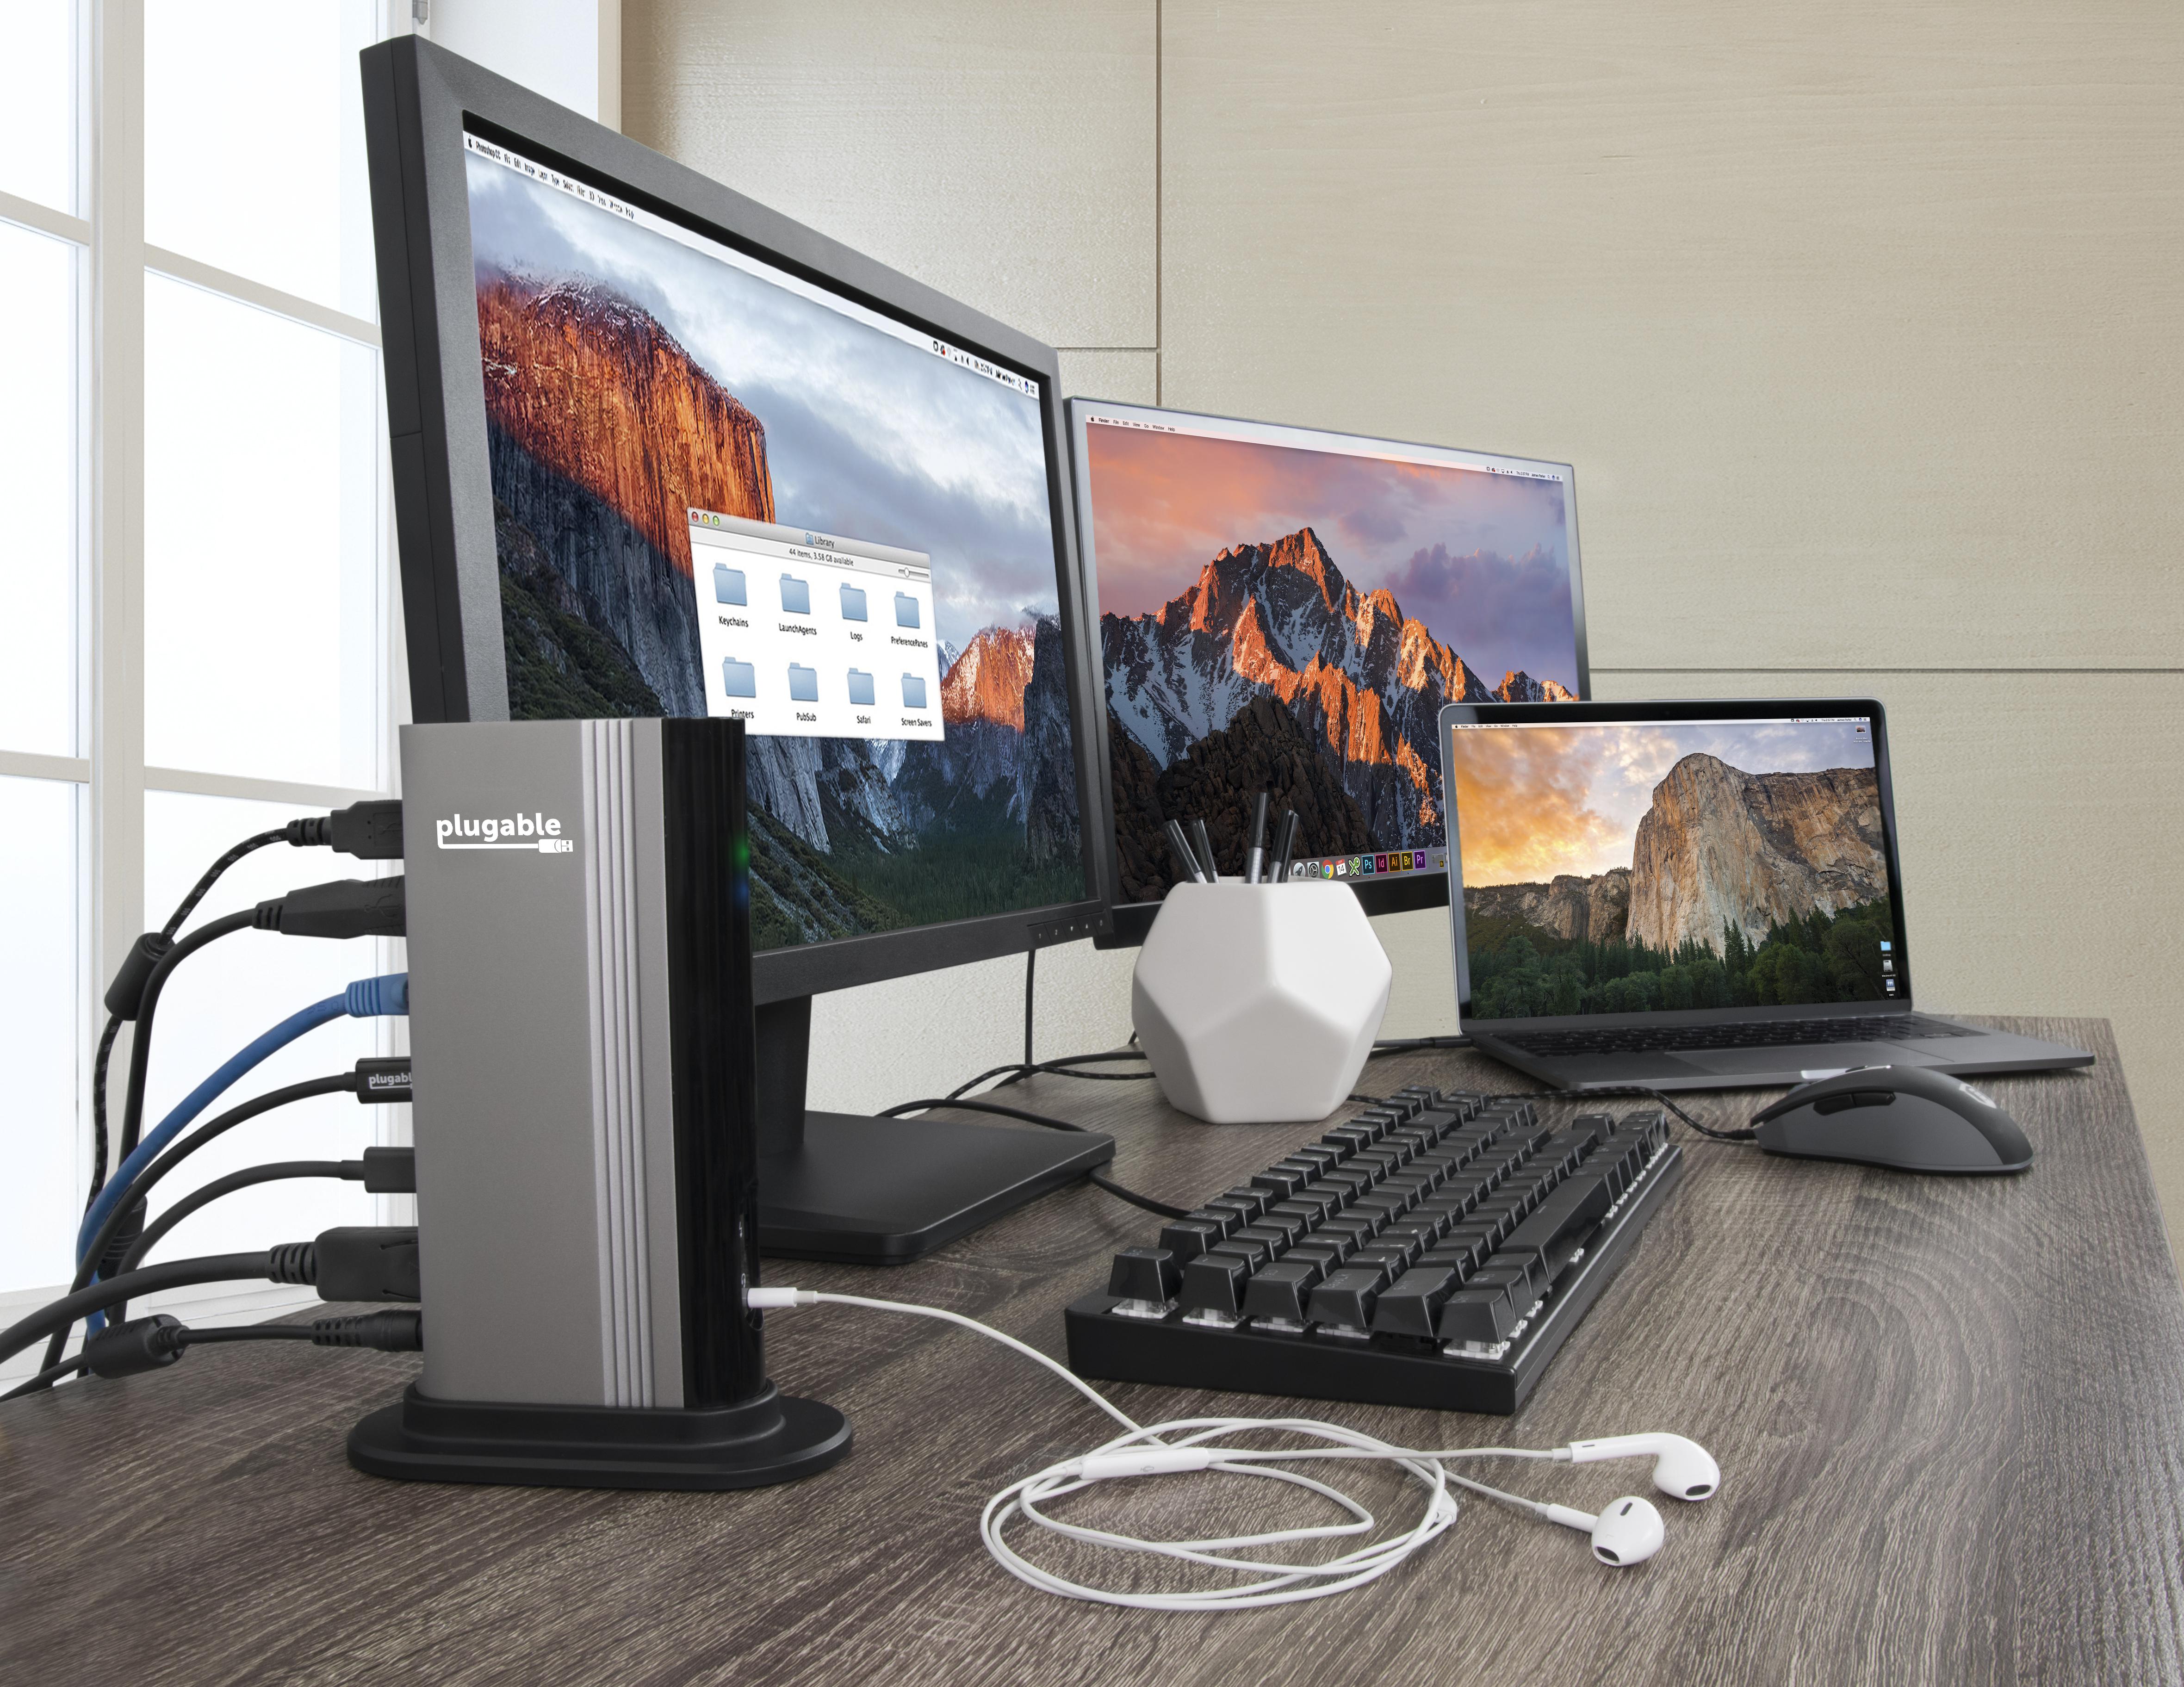 Plugable Thunderbolt 3 Dock Compatible with MacBook and Windows Laptops with Thunderbolt 3. Charges Laptop, adds HDMI / DisplayPort up to 4K 60, Ethernet, Audio, 5 USB 3.0 Ports - image 3 of 6